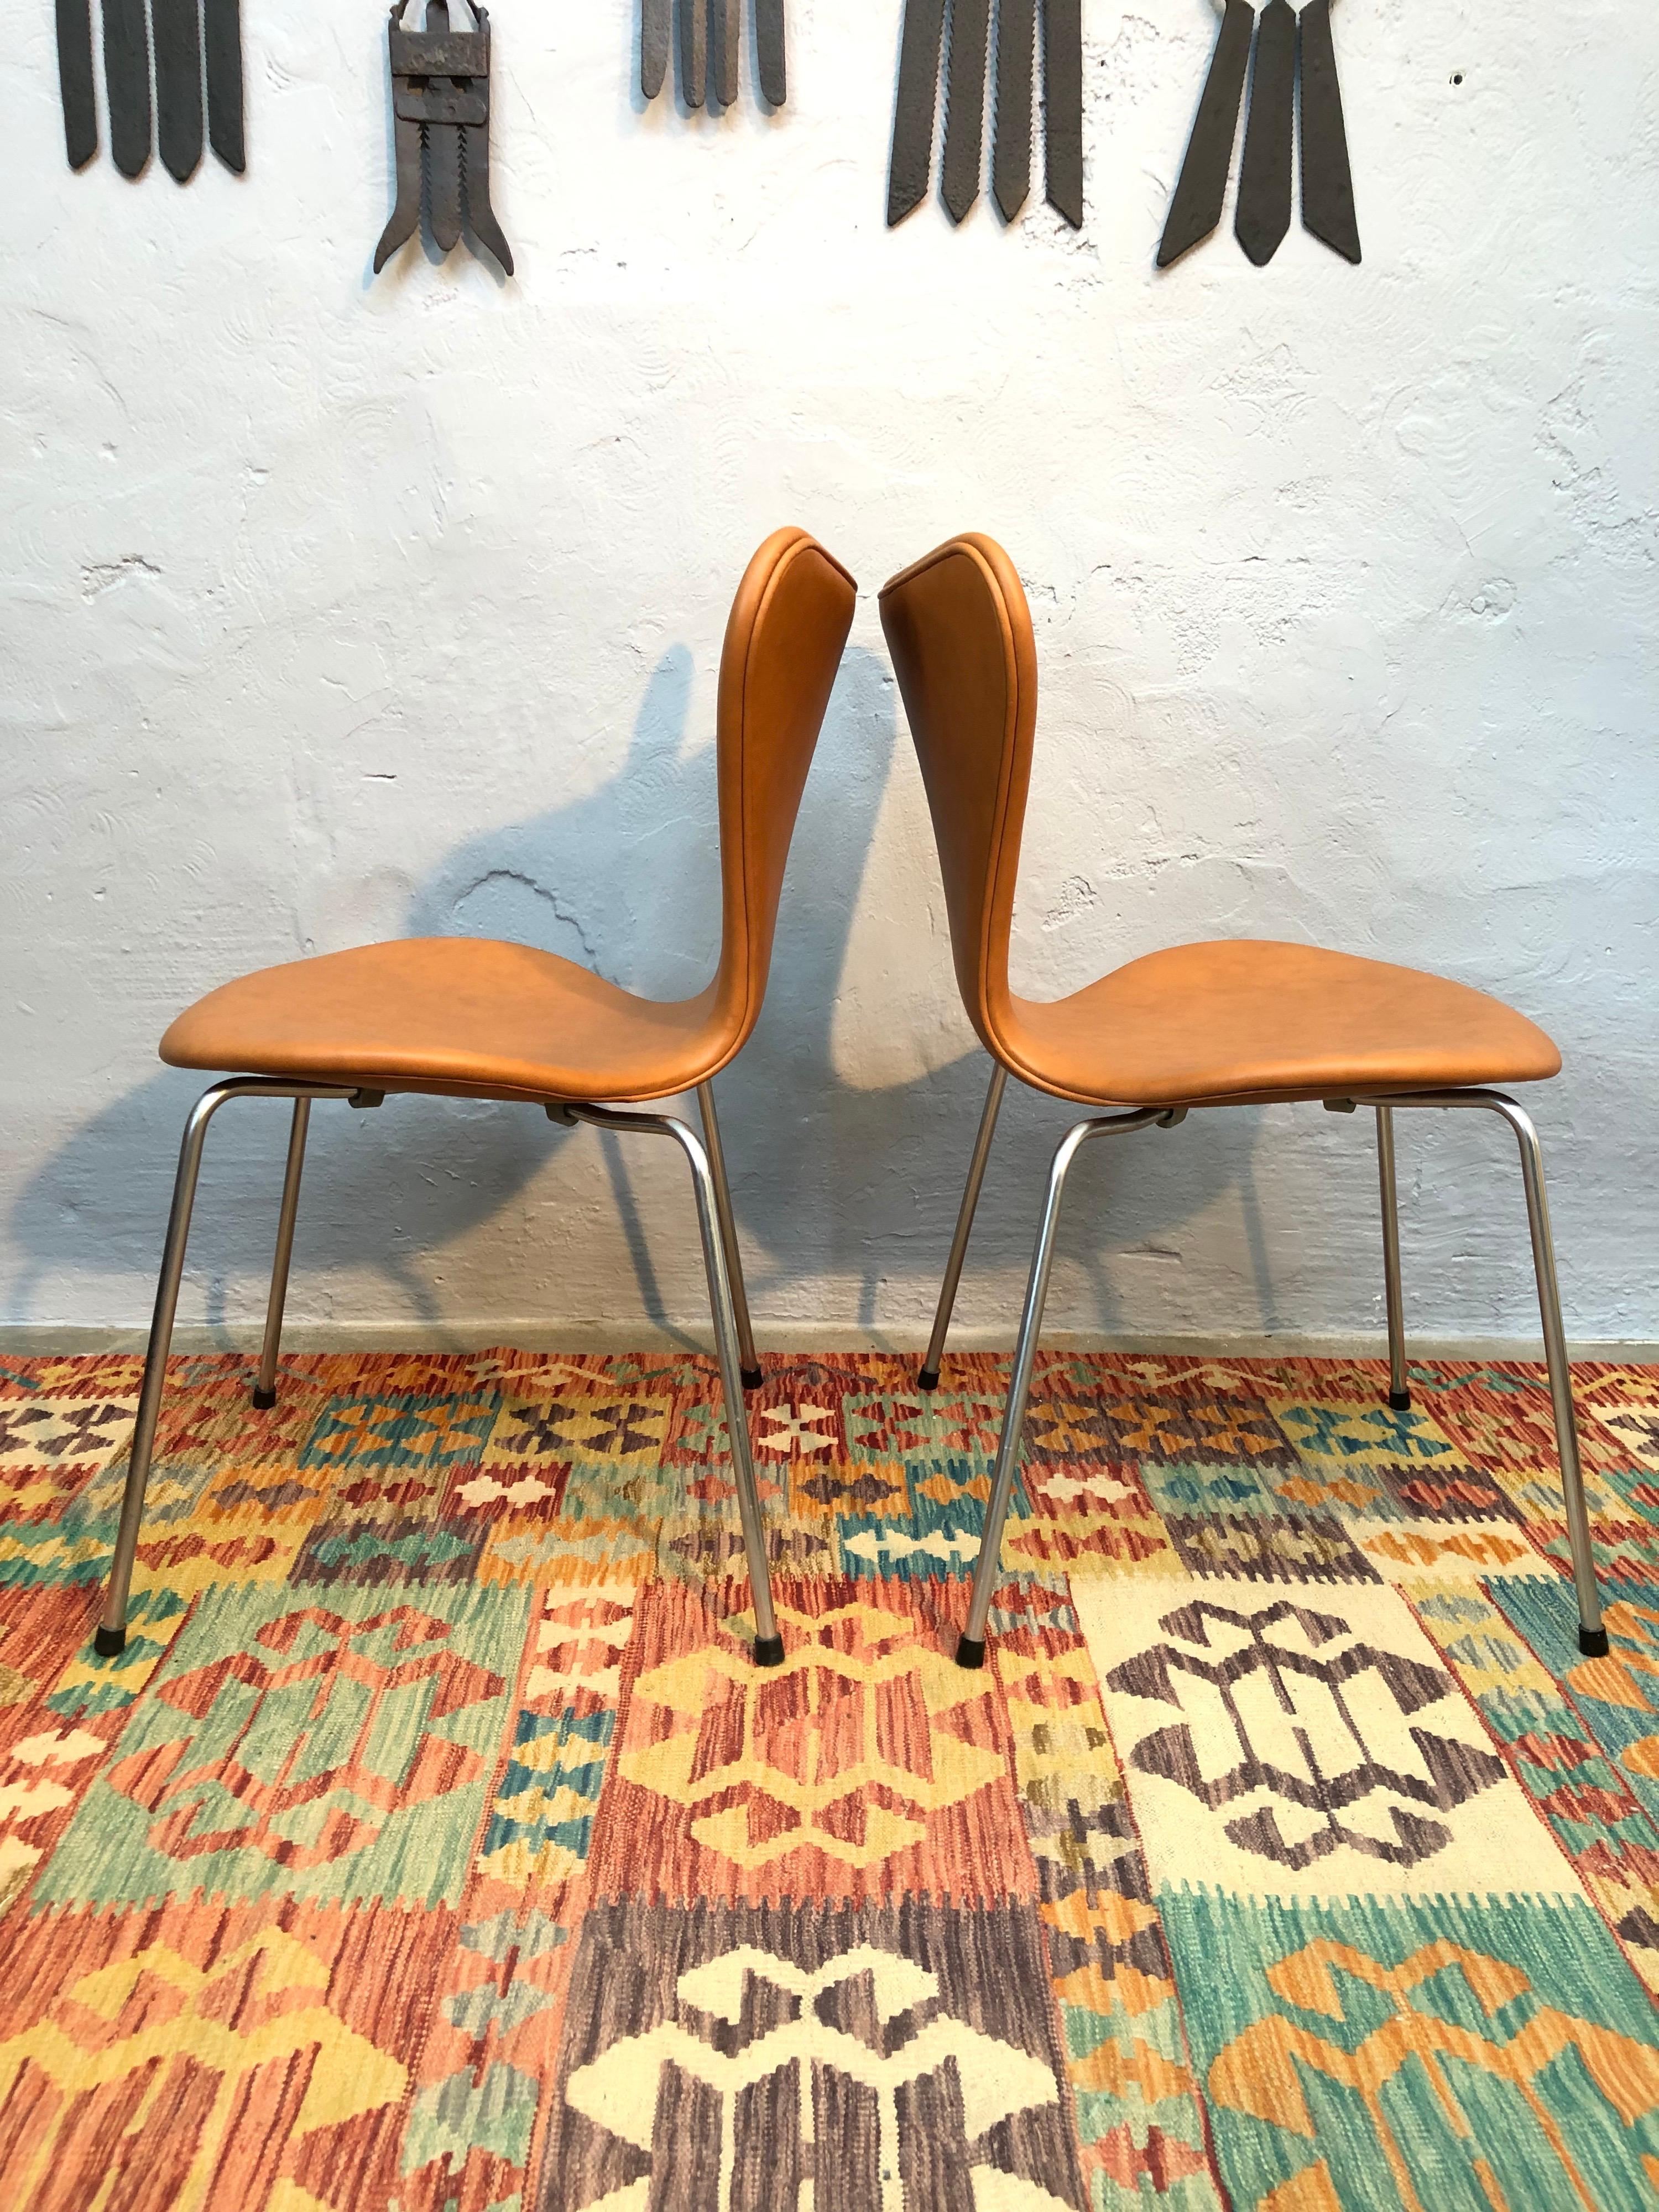 4 Iconic Vintage Arne Jacobsen for Fritz Hansen Chairs 3107/3207 in Leather 5